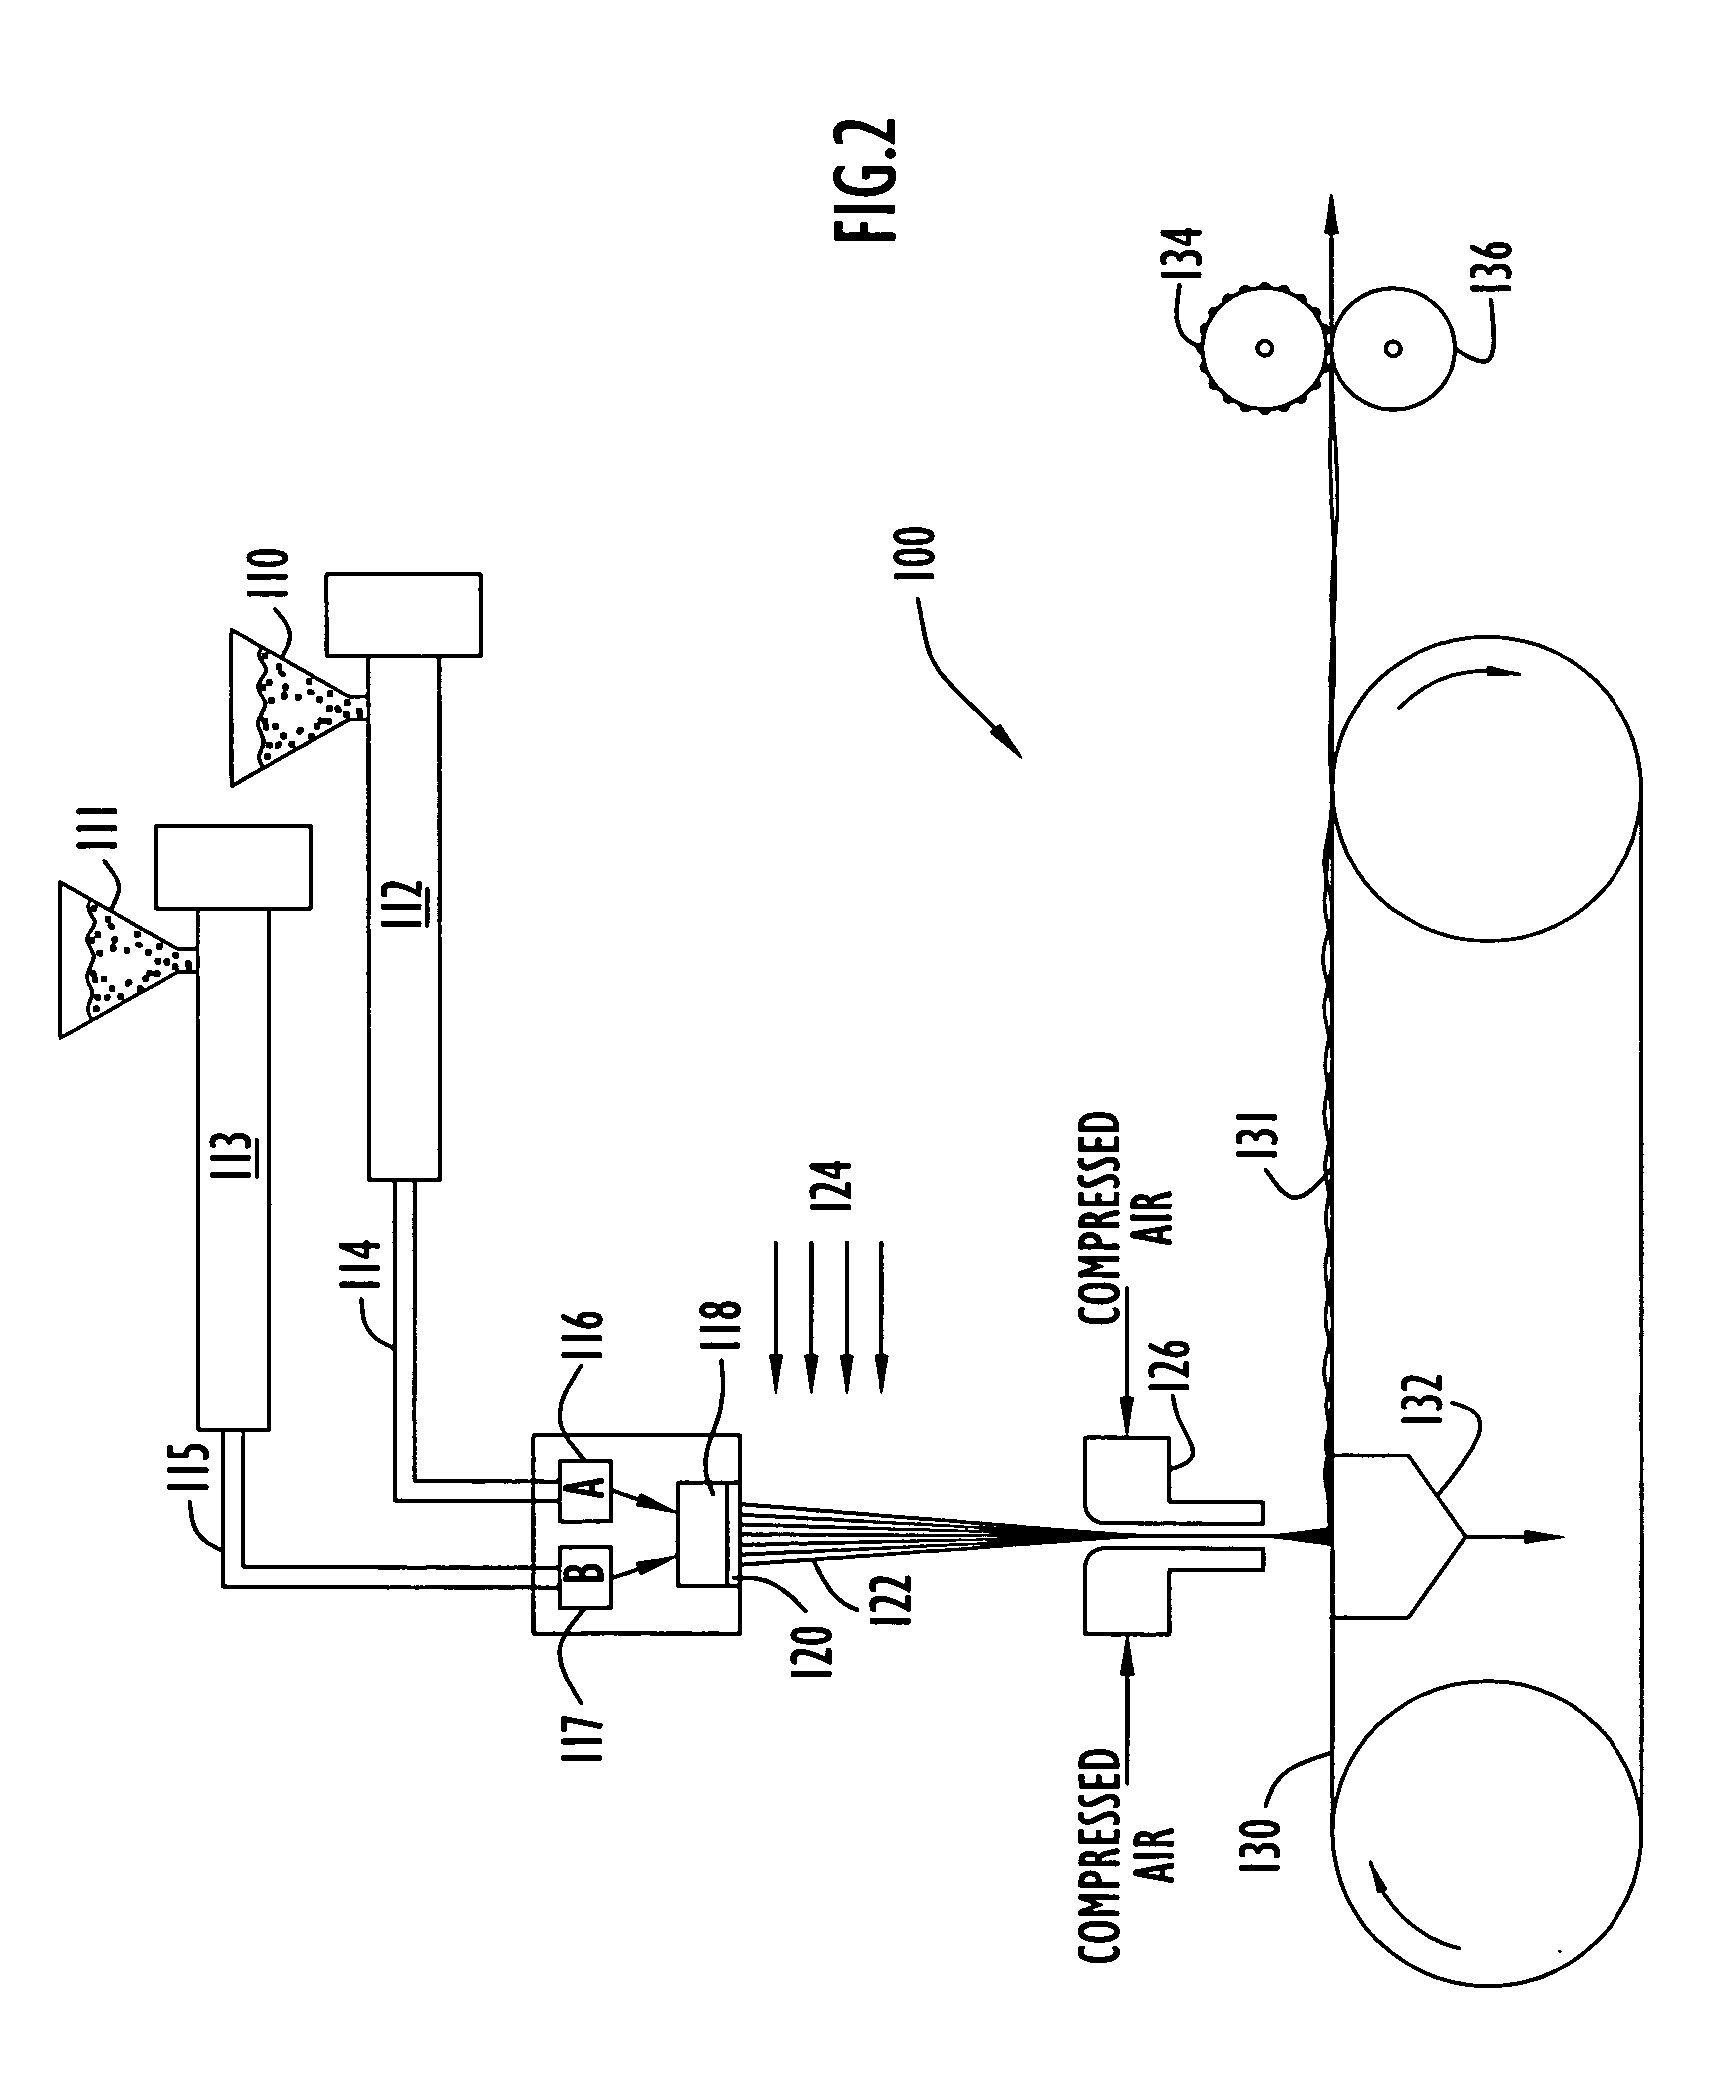 Methods and apparatus for forming ultra-fine fibers and non-woven webs of ultra-fine spunbond fibers